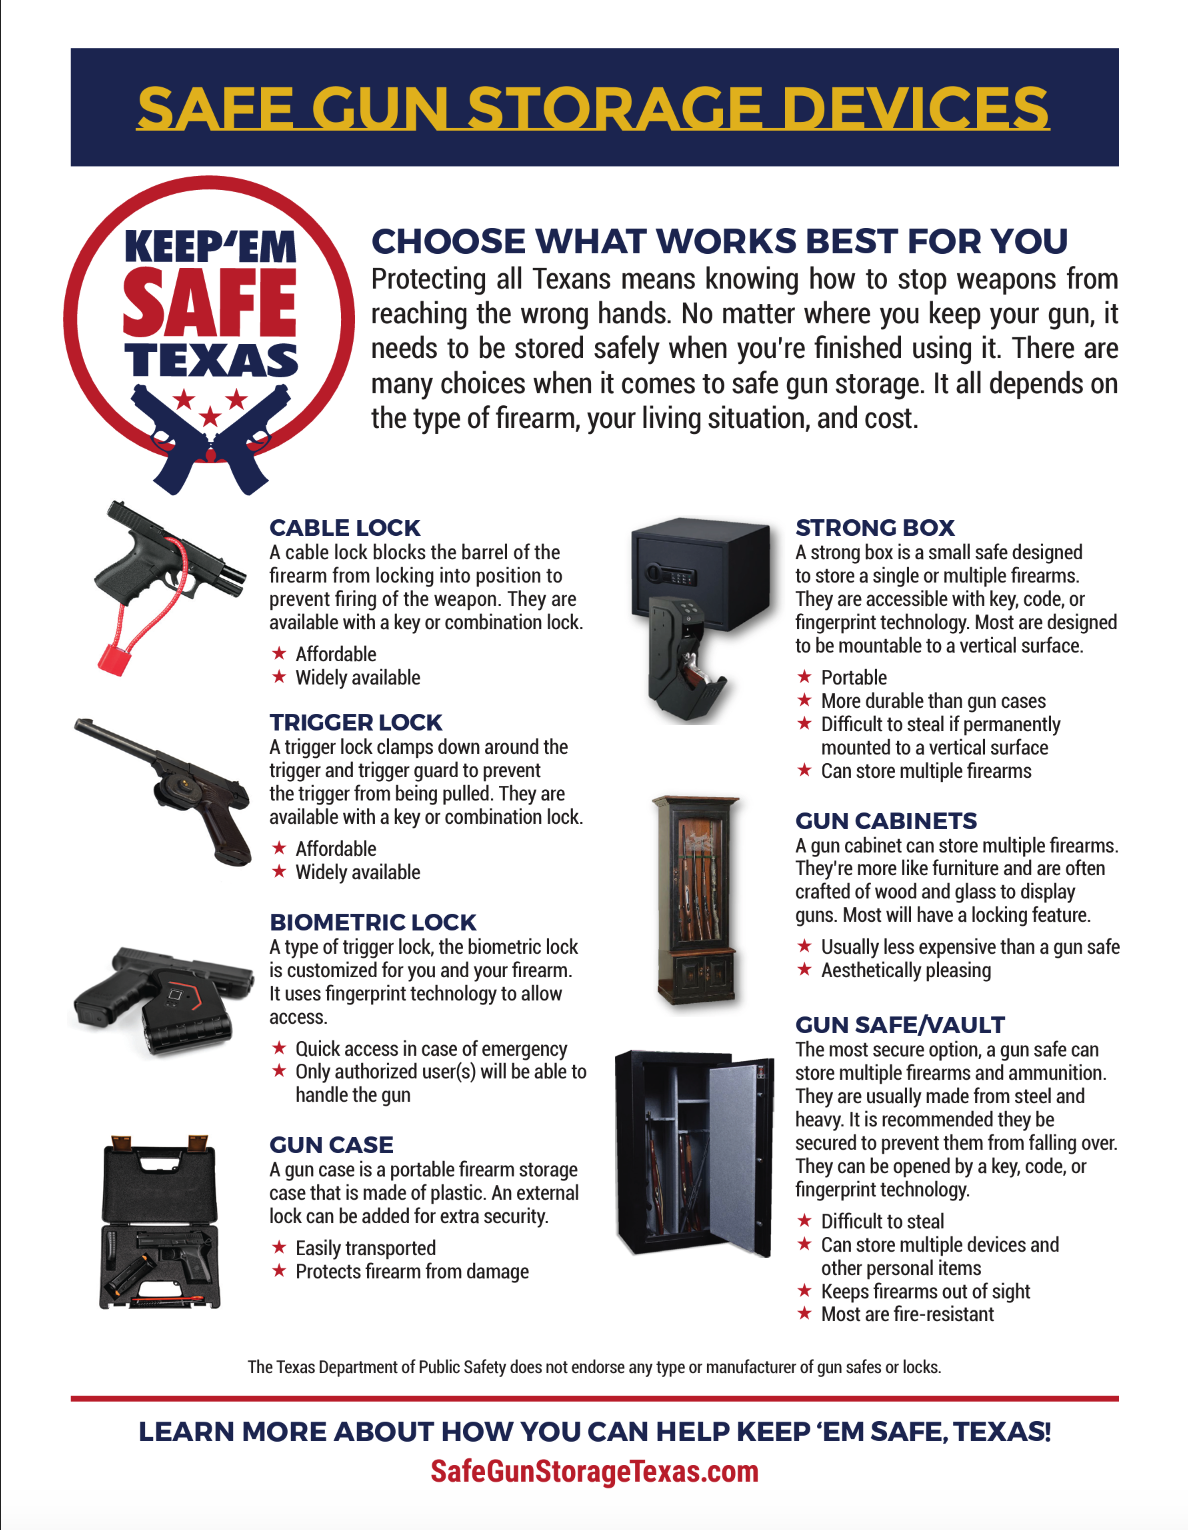 Securing your firearms to keep them out of the wrong hands